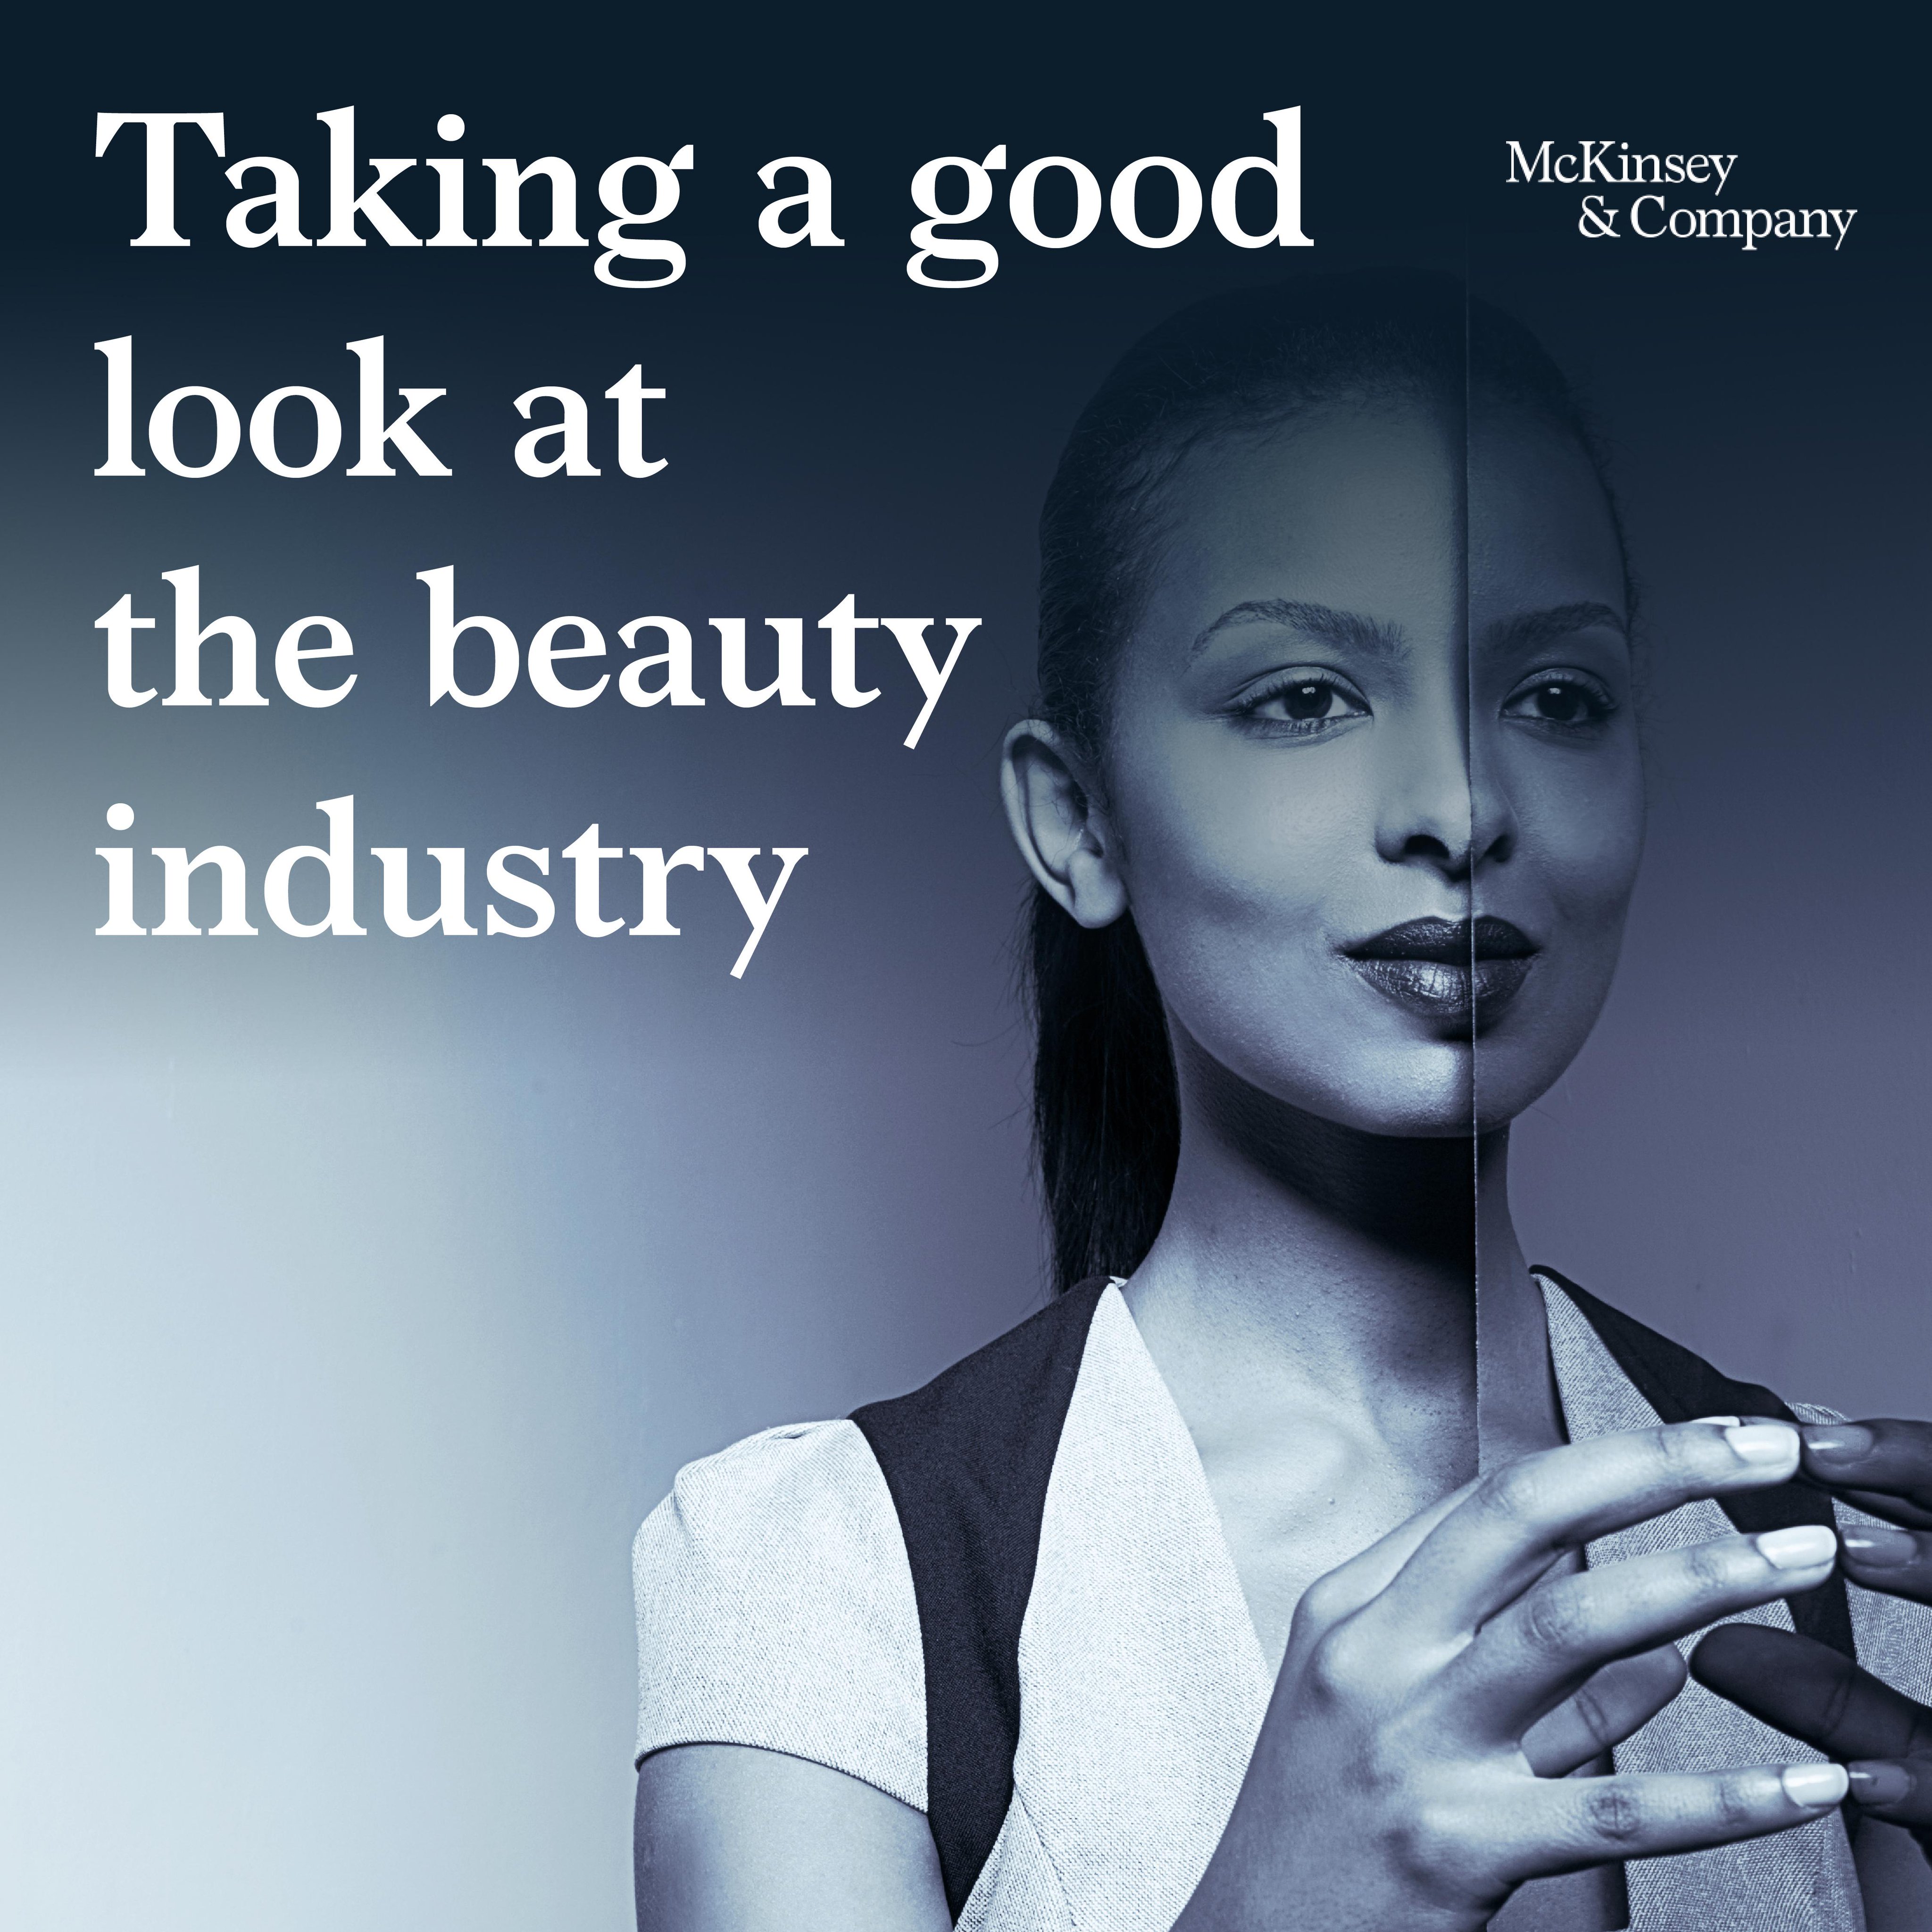 Taking a good look at the beauty industry